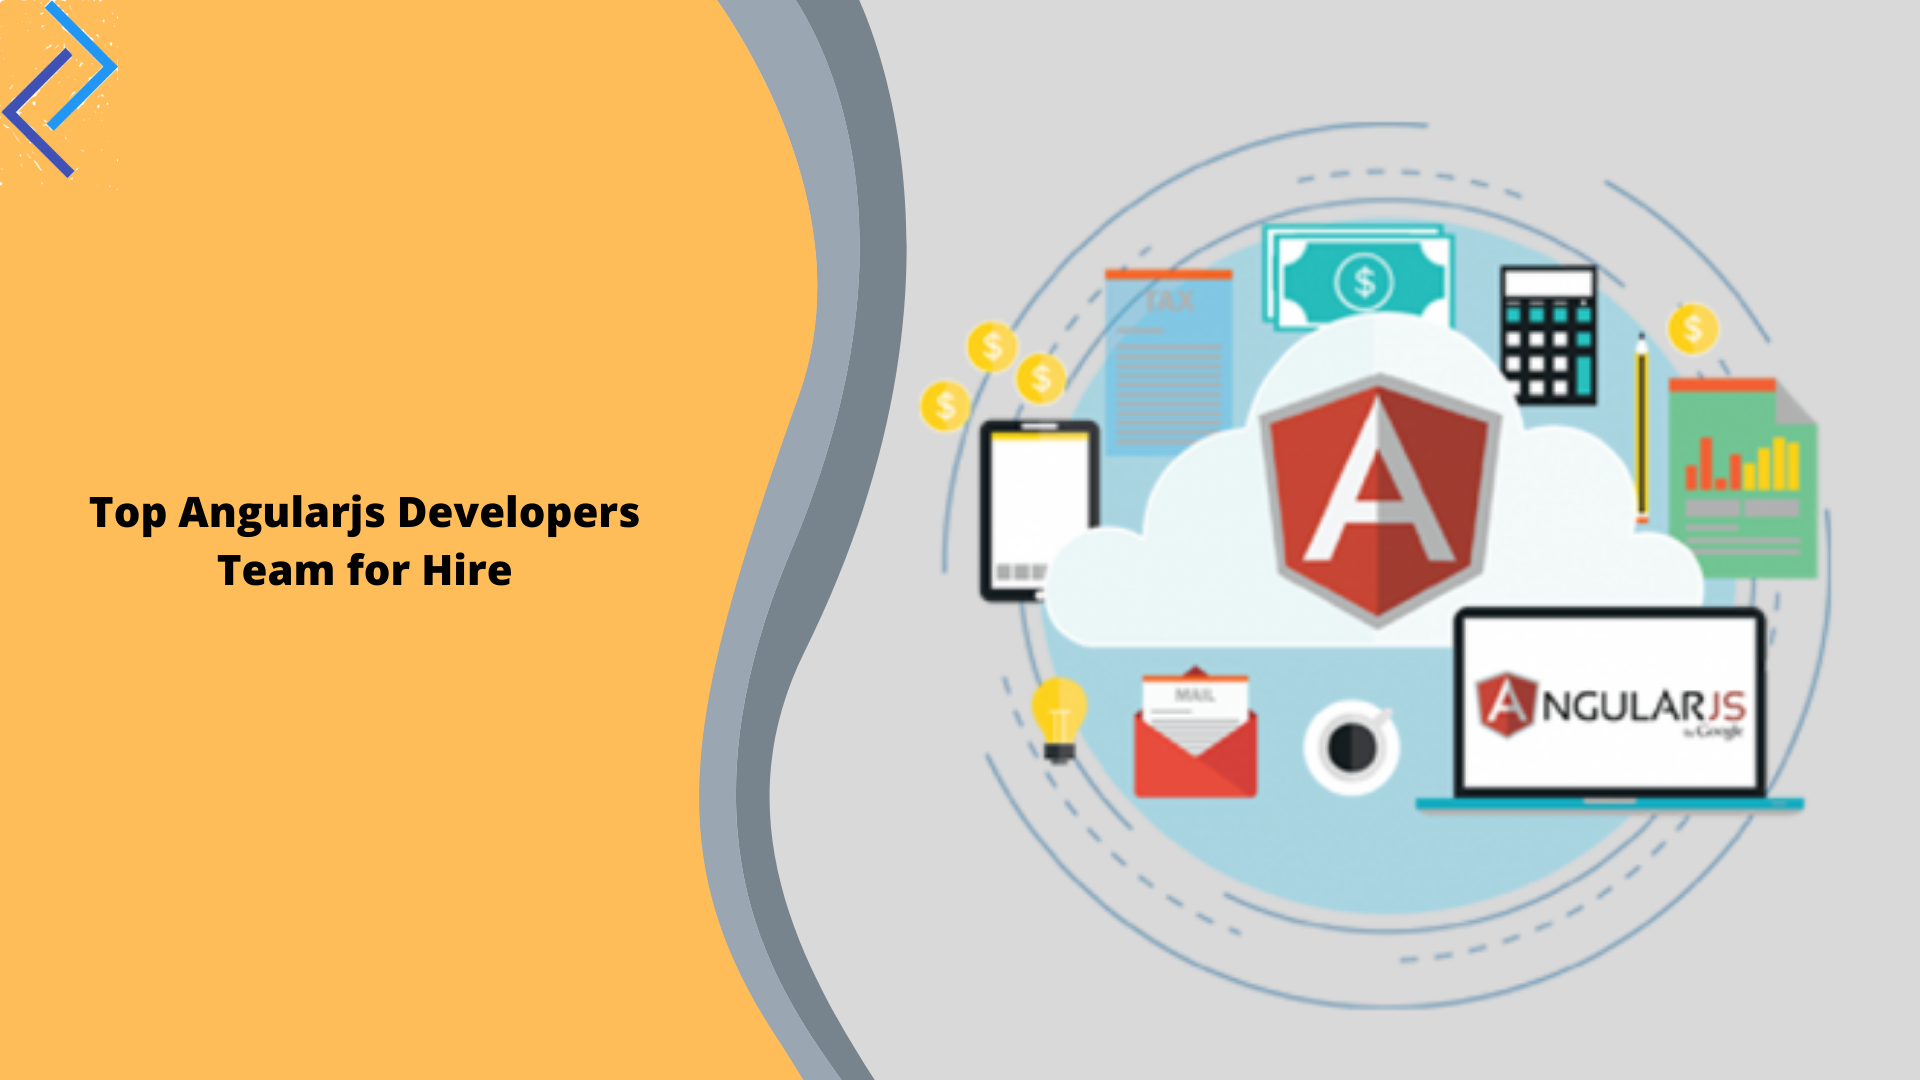 Top Angularjs Developers Team for Hire